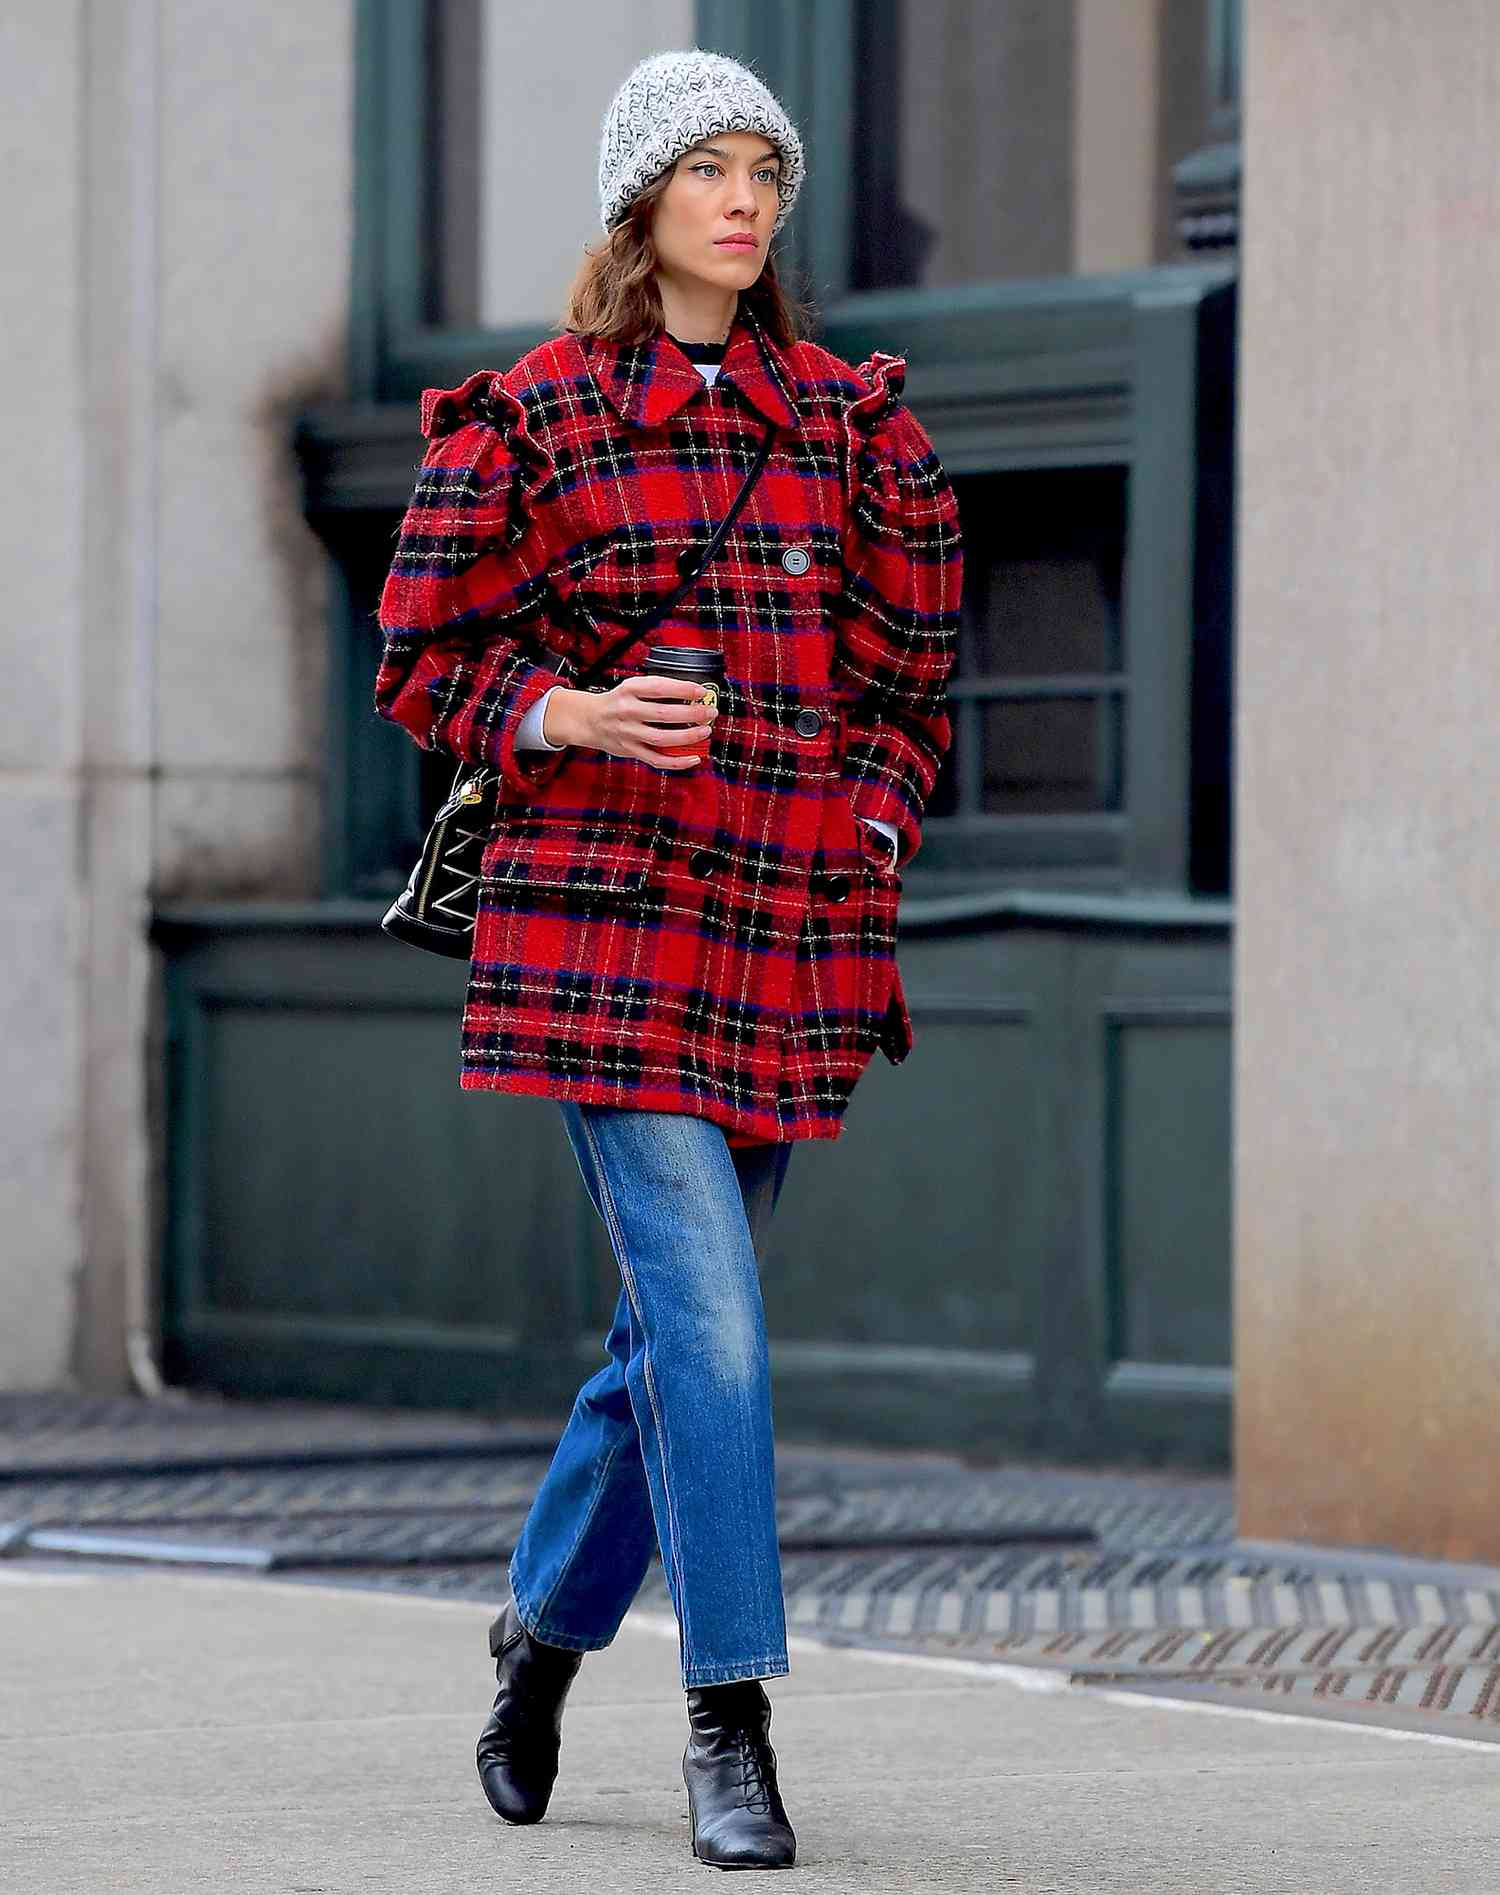 EXCLUSIVE: Alexa Chung Steps Out In The Perfect Chic Winter Ensemble